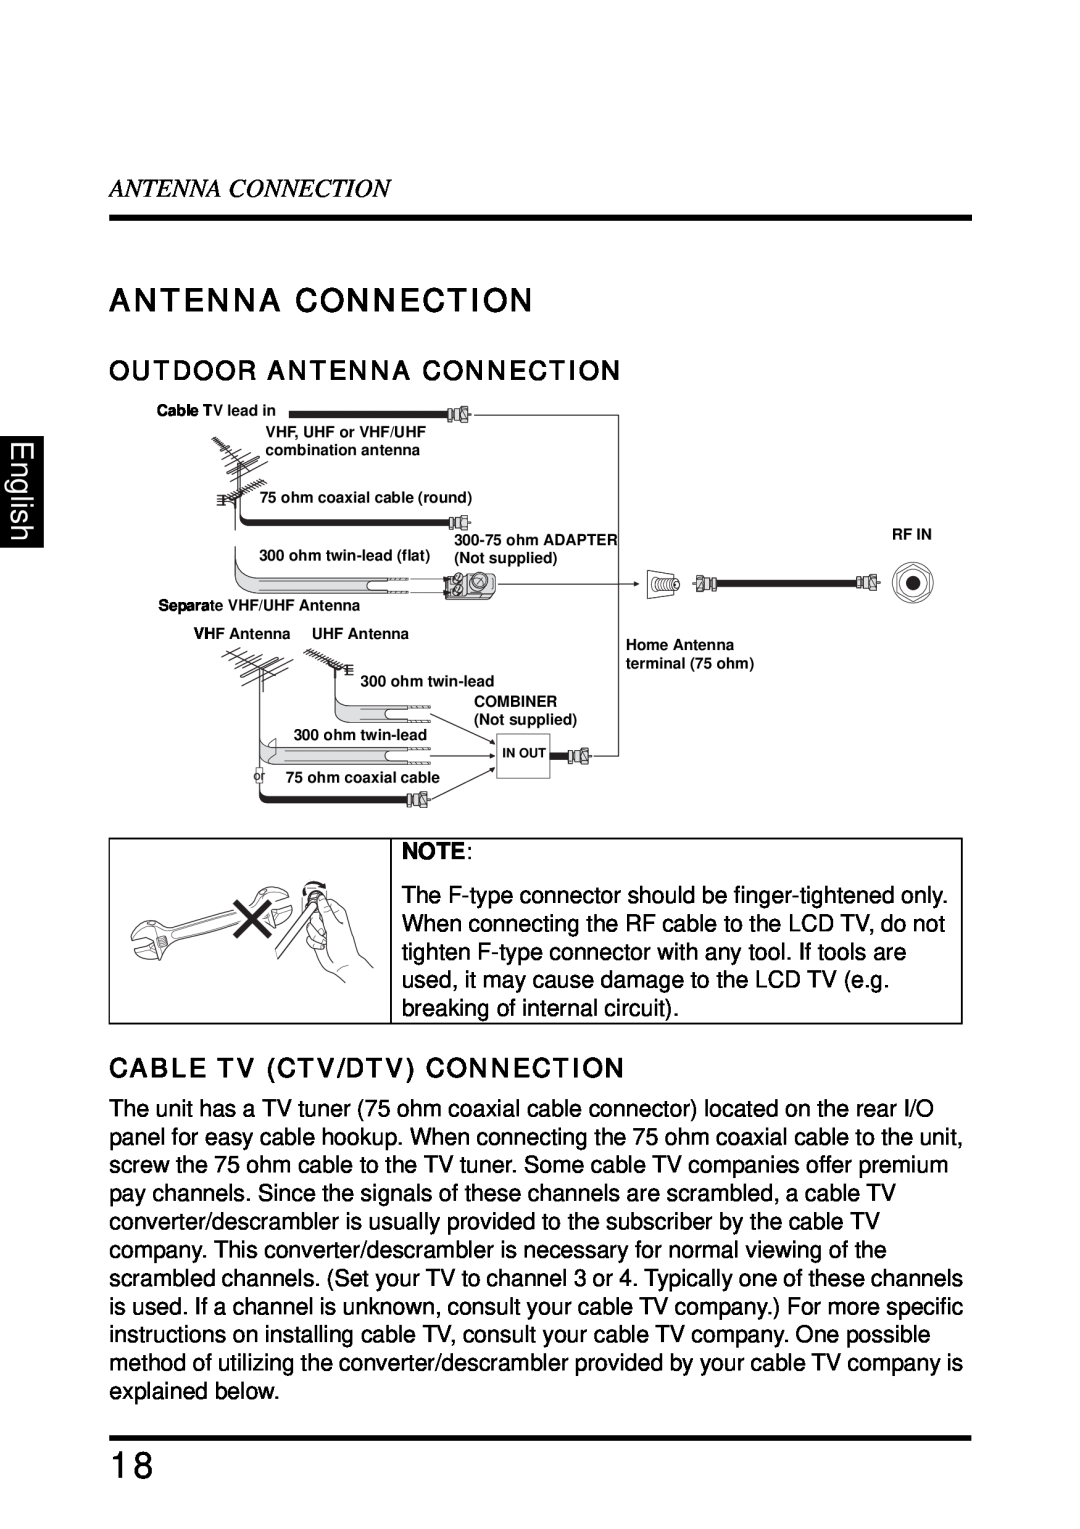 Westinghouse SK-32H640G user manual English, Outdoor Antenna Connection, Cable Tv Ctv/Dtv Connection 